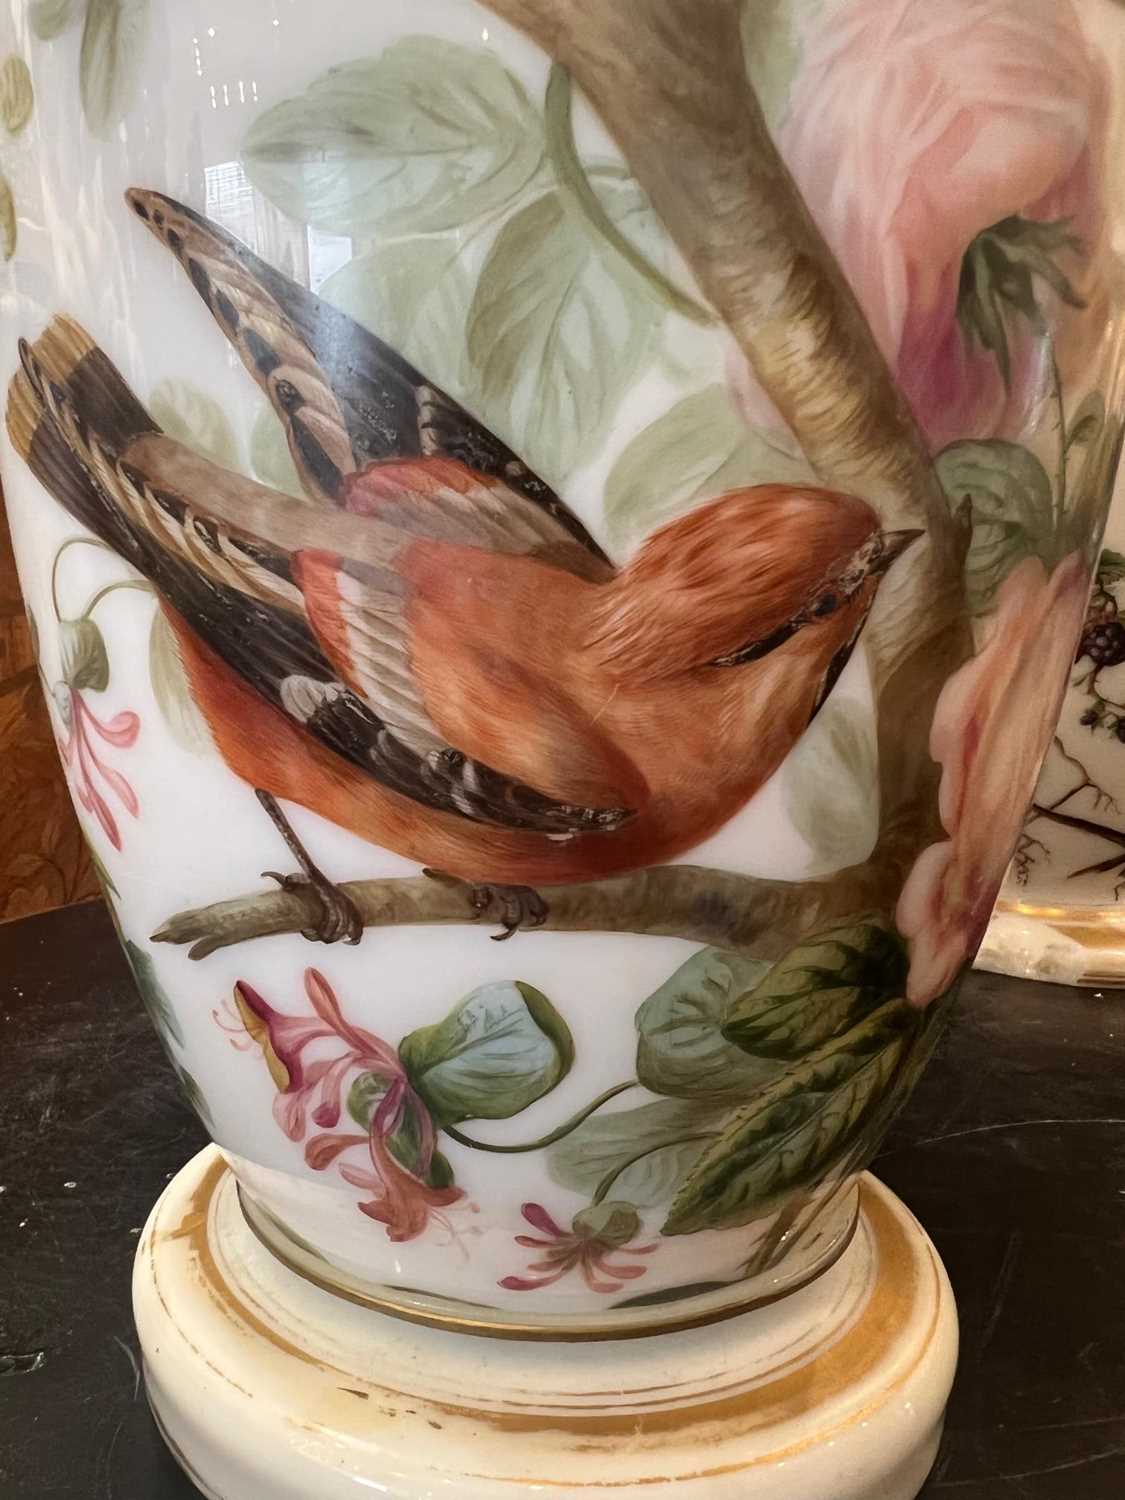 ATTRIBUTED TO BACCARAT: A RARE MID 19TH CENTURY OPALINE GLASS VASE DECORATED WITH EXOTIC BIRDS - Image 10 of 12